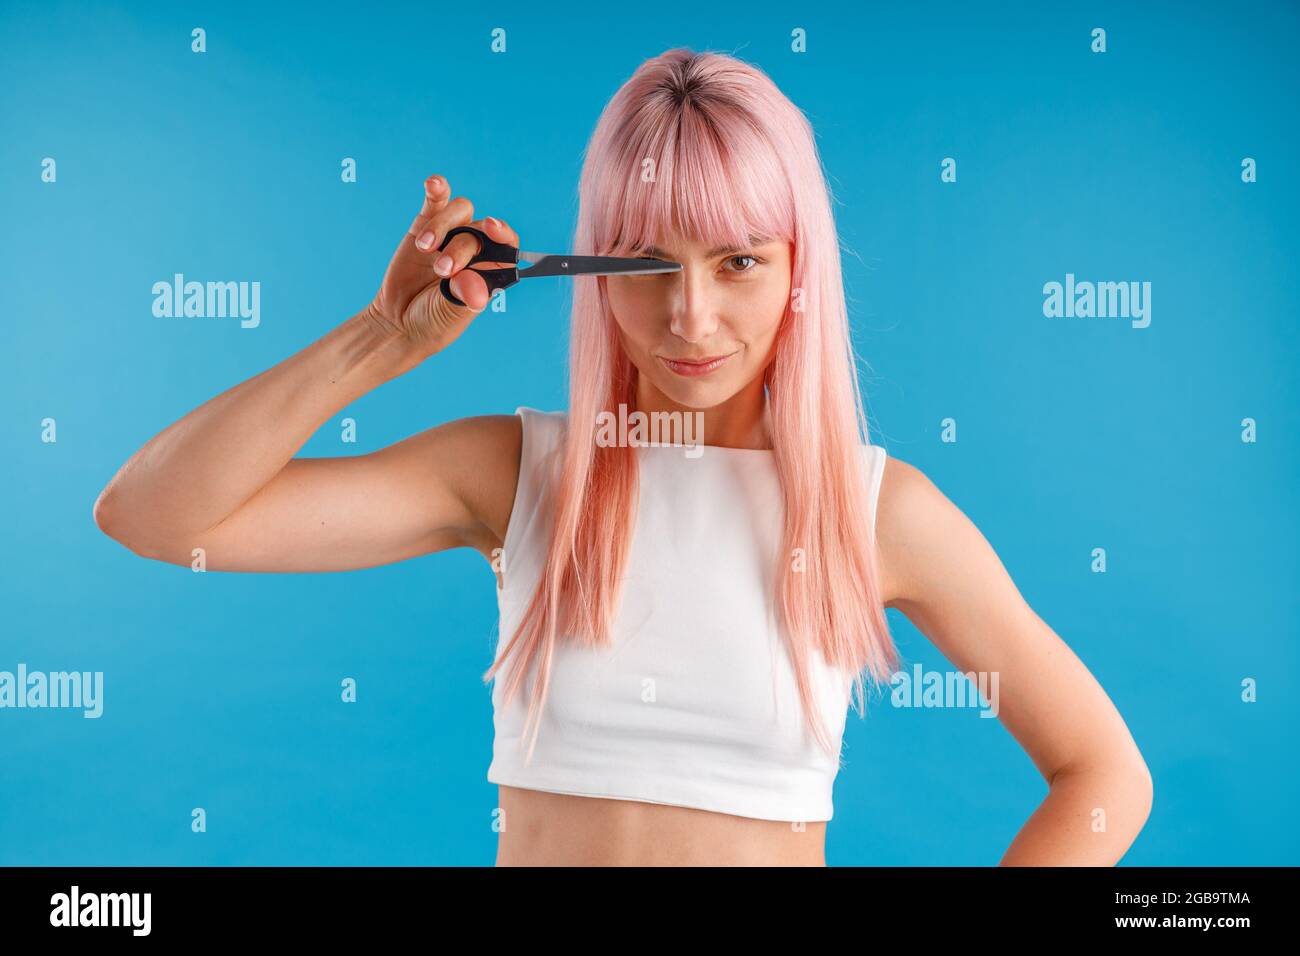 Fashionable Girl Pink Wig Holding Scissors Isolated Pink Stock Photo by  ©EdZbarzhyvetsky 228938530